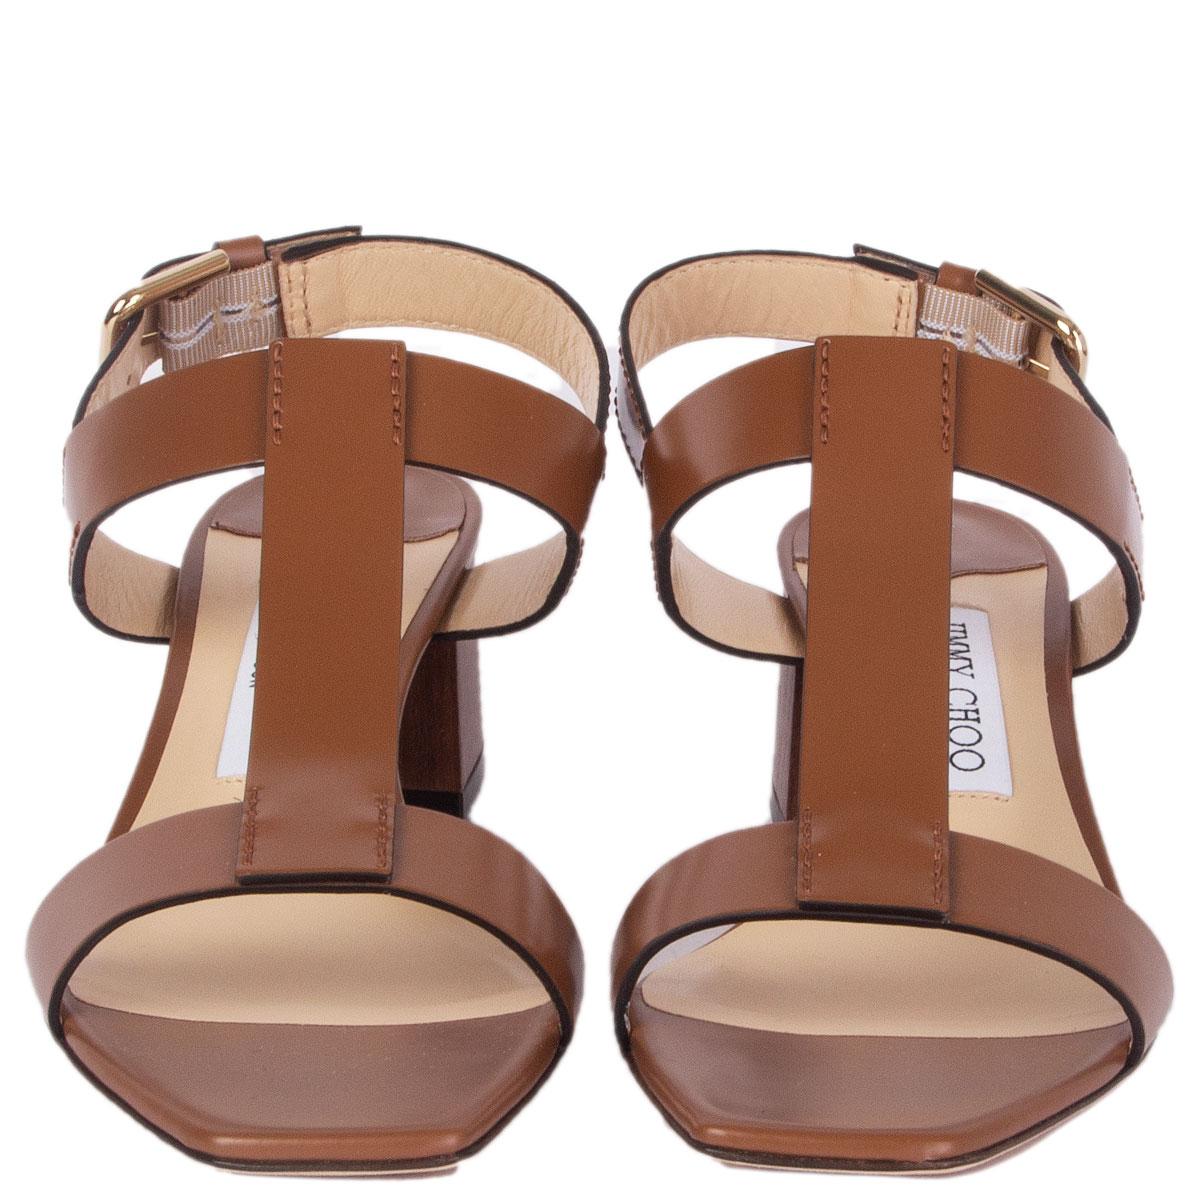 100% authentic Jimmy Choo 'Jin' slingback sandals in brown calfskin with brown wooden block-heel. Brand new. Come with dust bag. 

Imprinted Size	37.5
Shoe Size	37.5
Inside Sole	24cm (9.4in)
Width	7.5cm (2.9in)
Heel	5cm (2in)
Hardware	Light